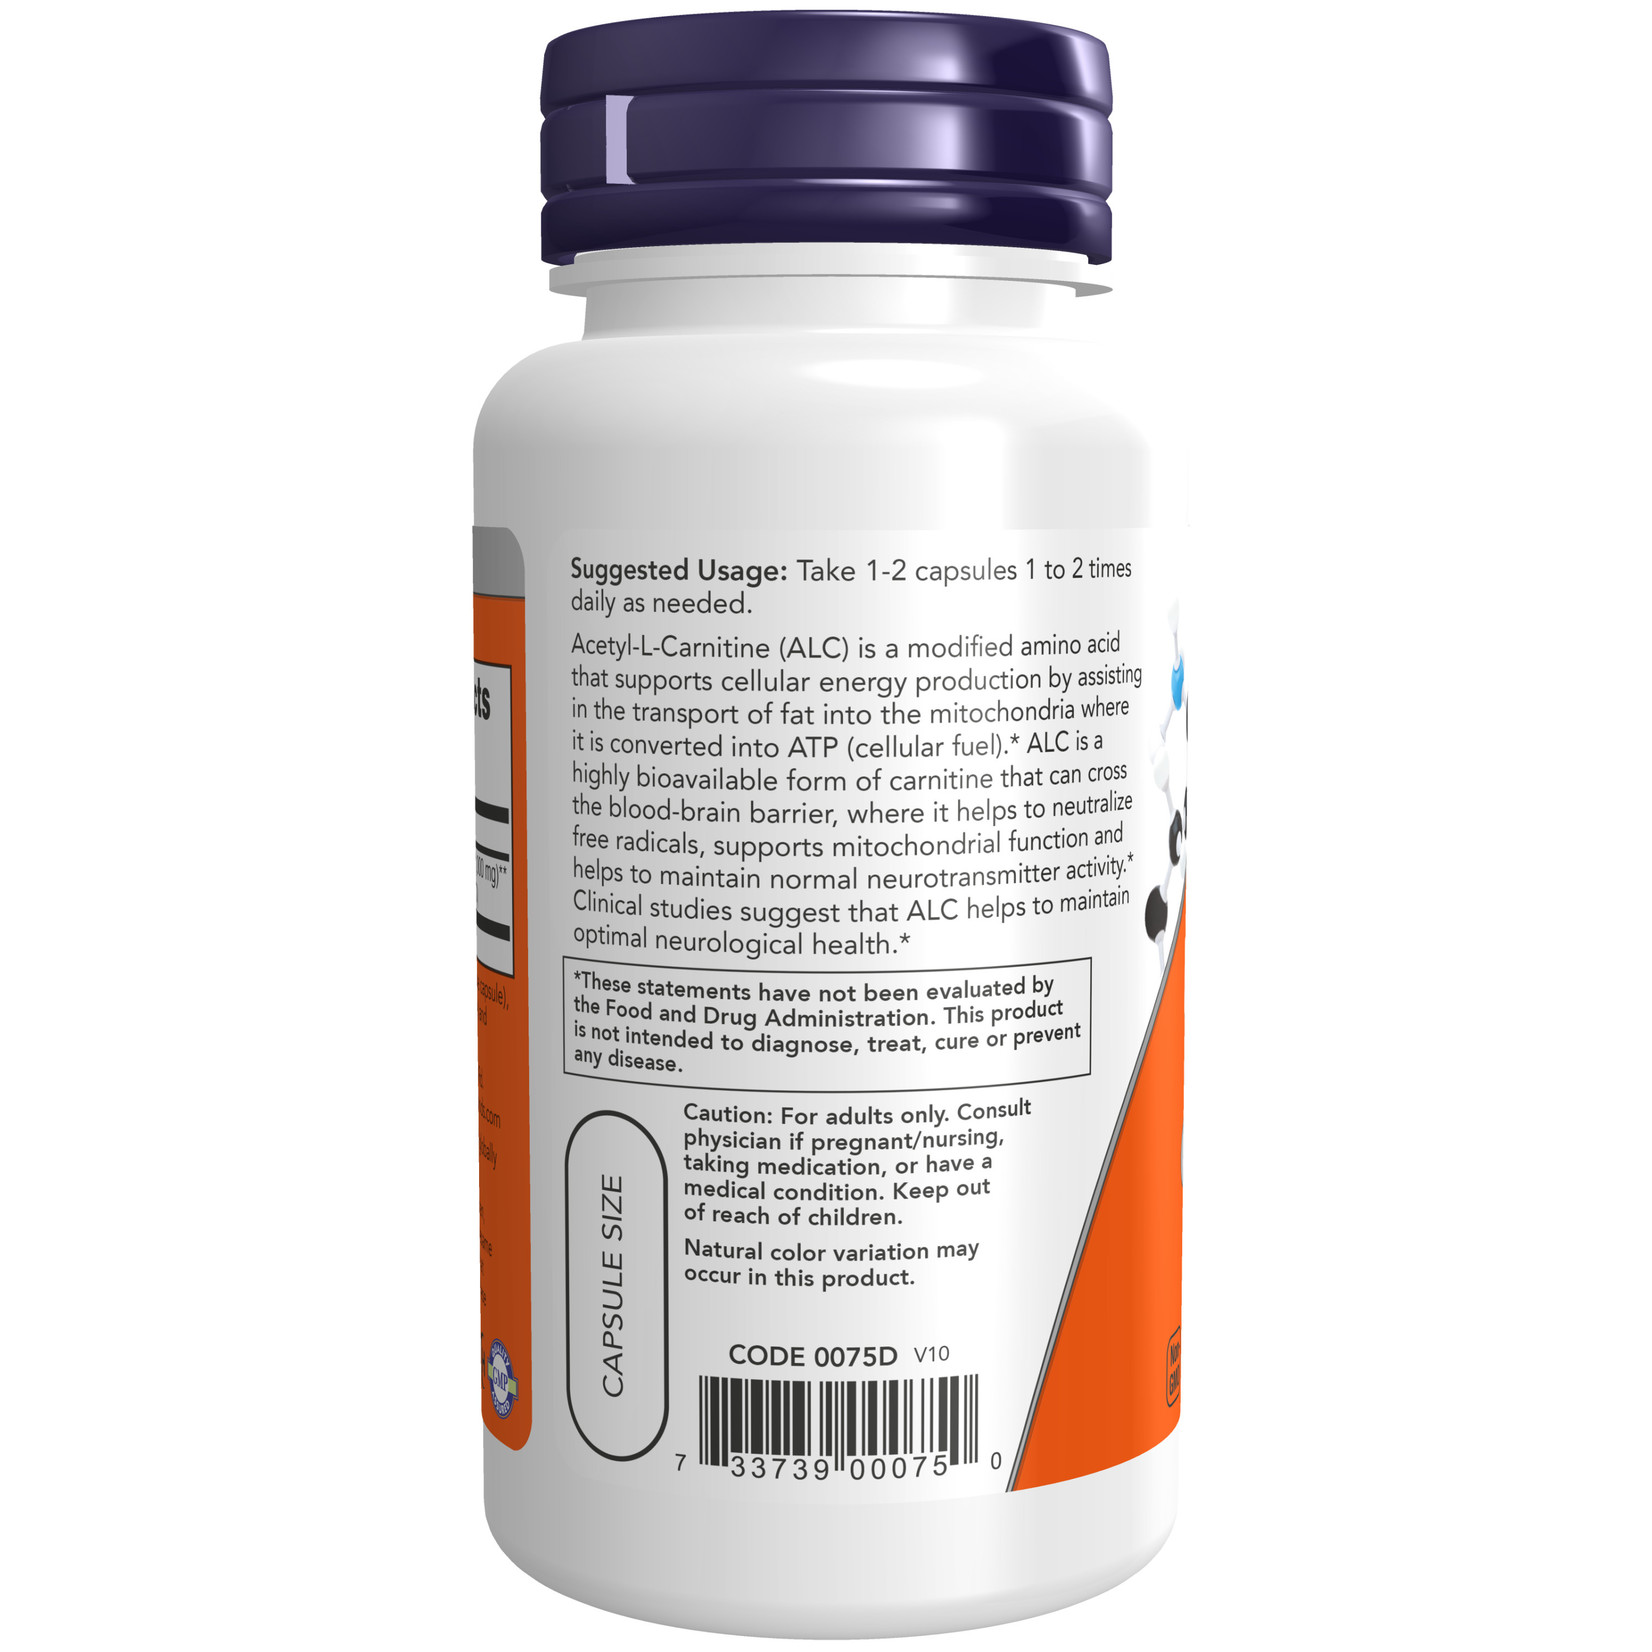 Now Now - Acetyl-L-Carnitine 500 mg - 50 Veg Capsules